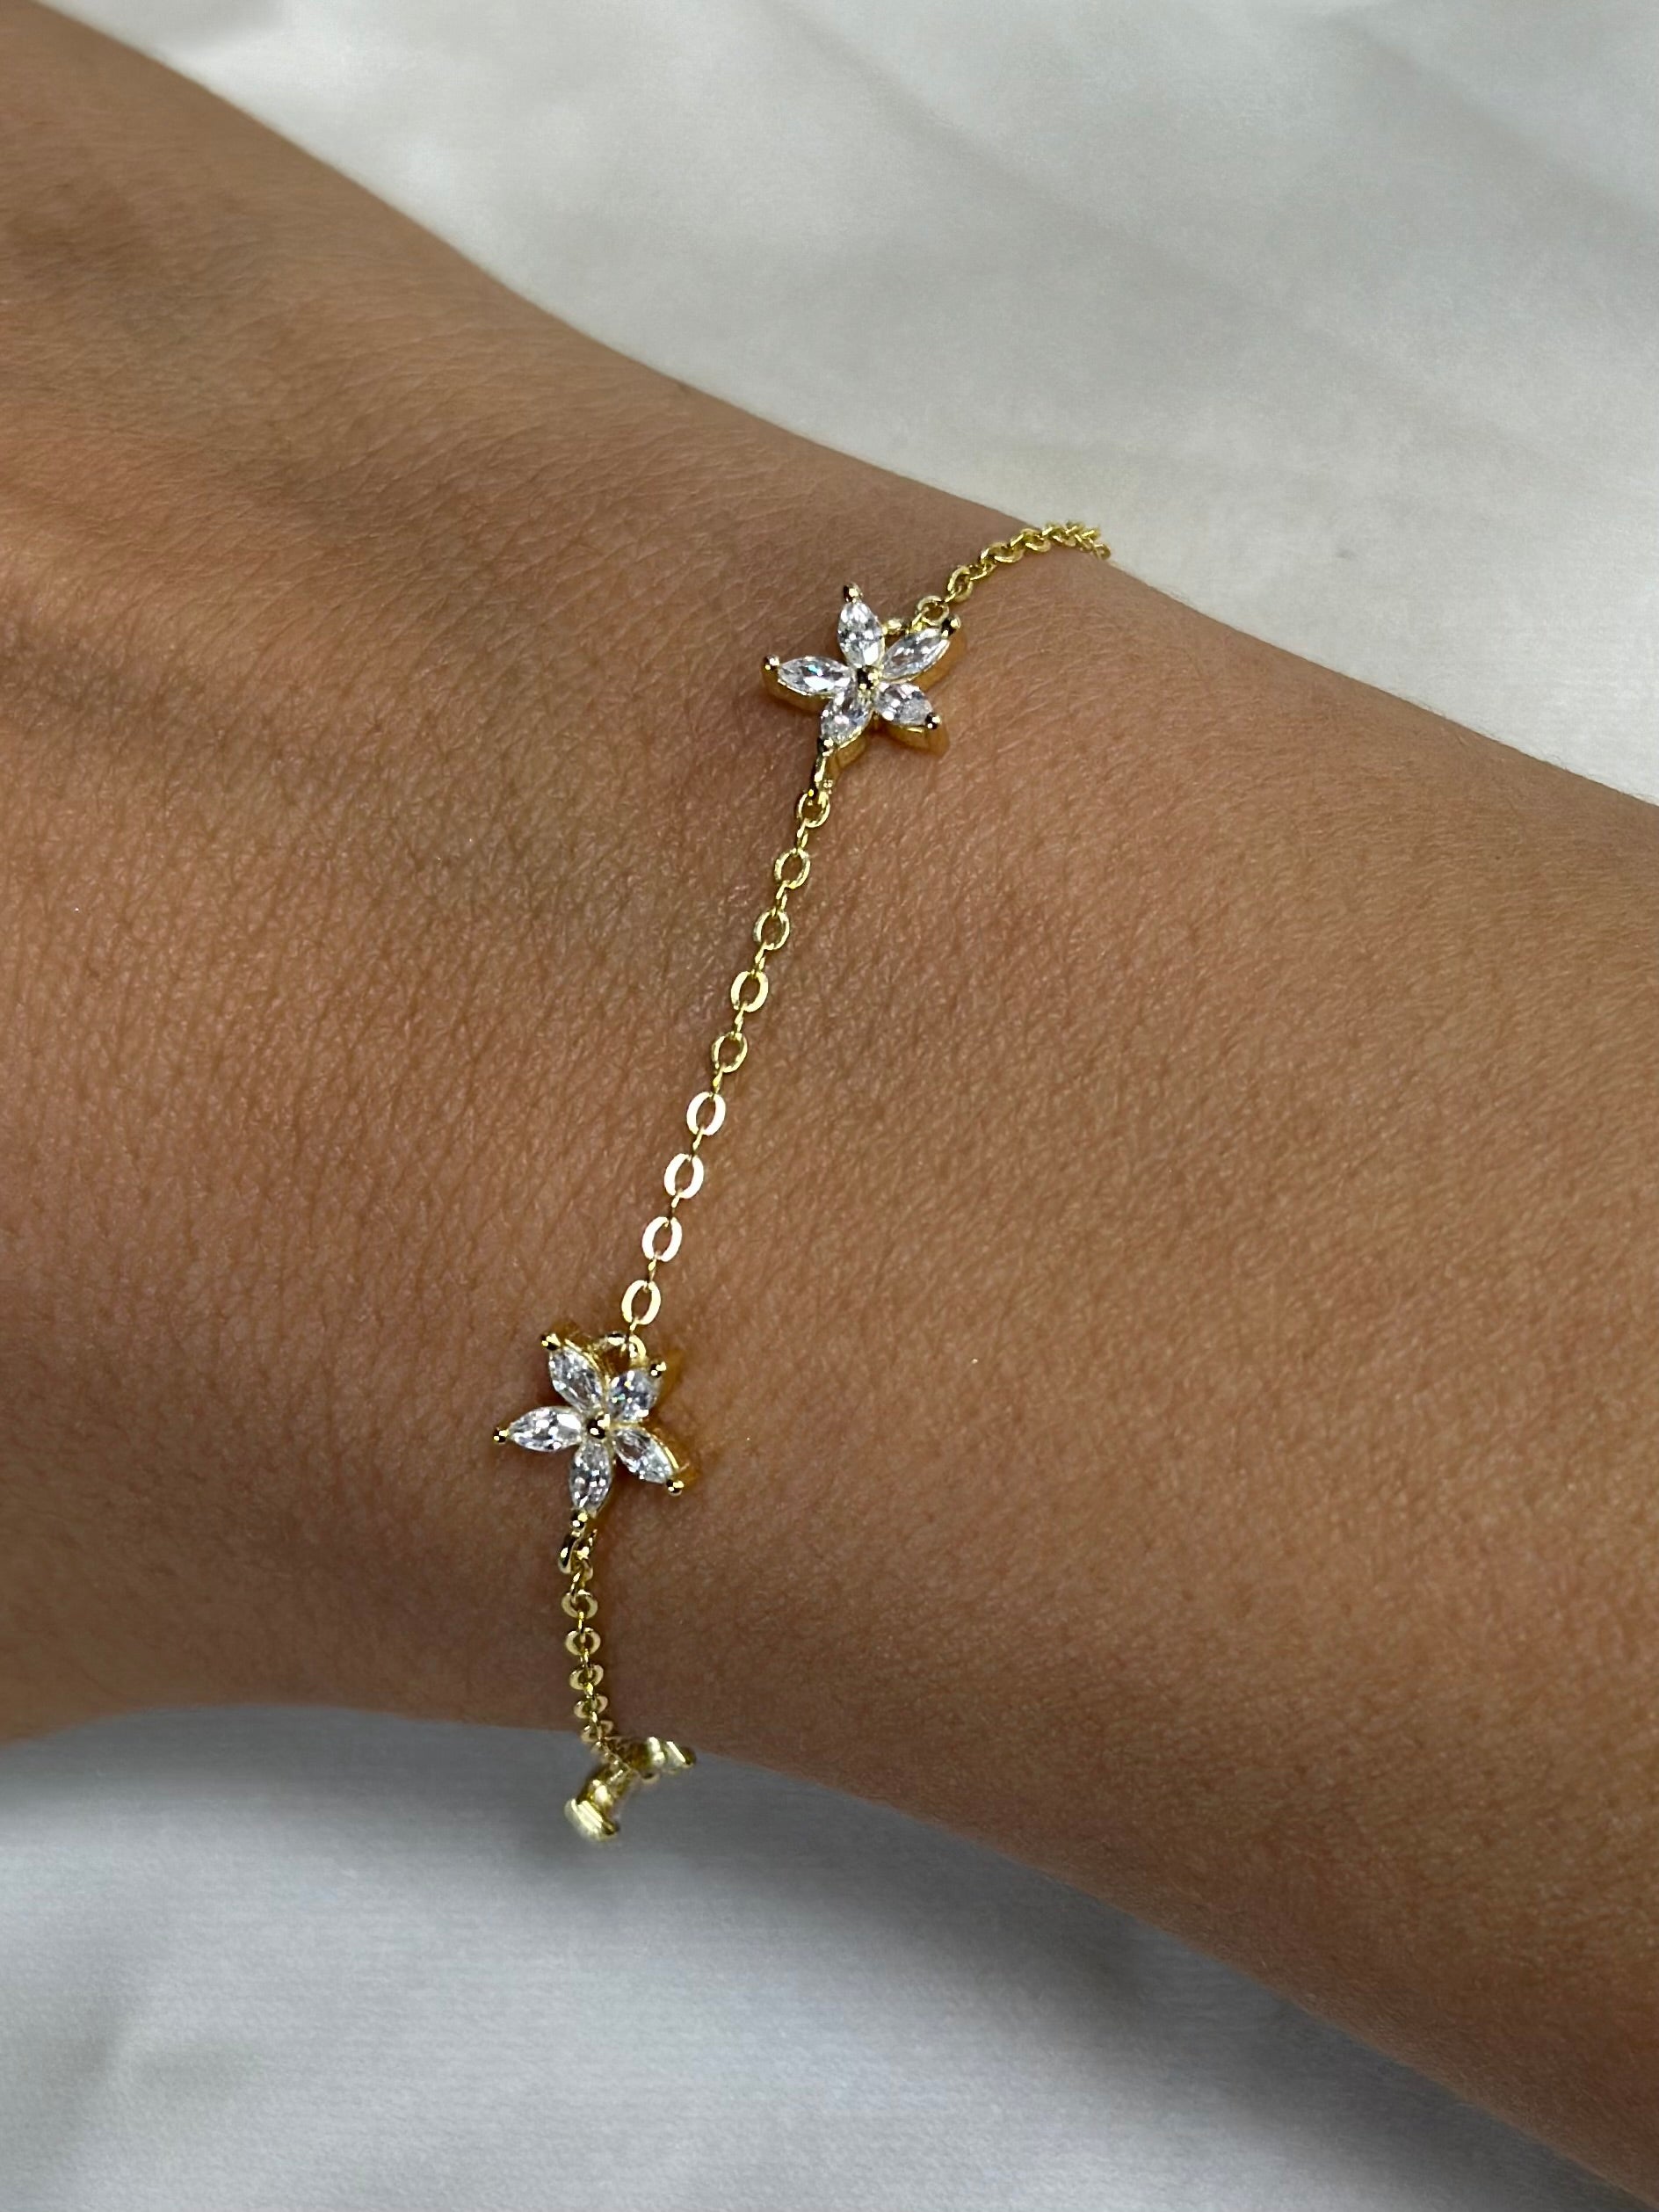 FLOWER BRACELET DECORATED WITH CRYSTALS